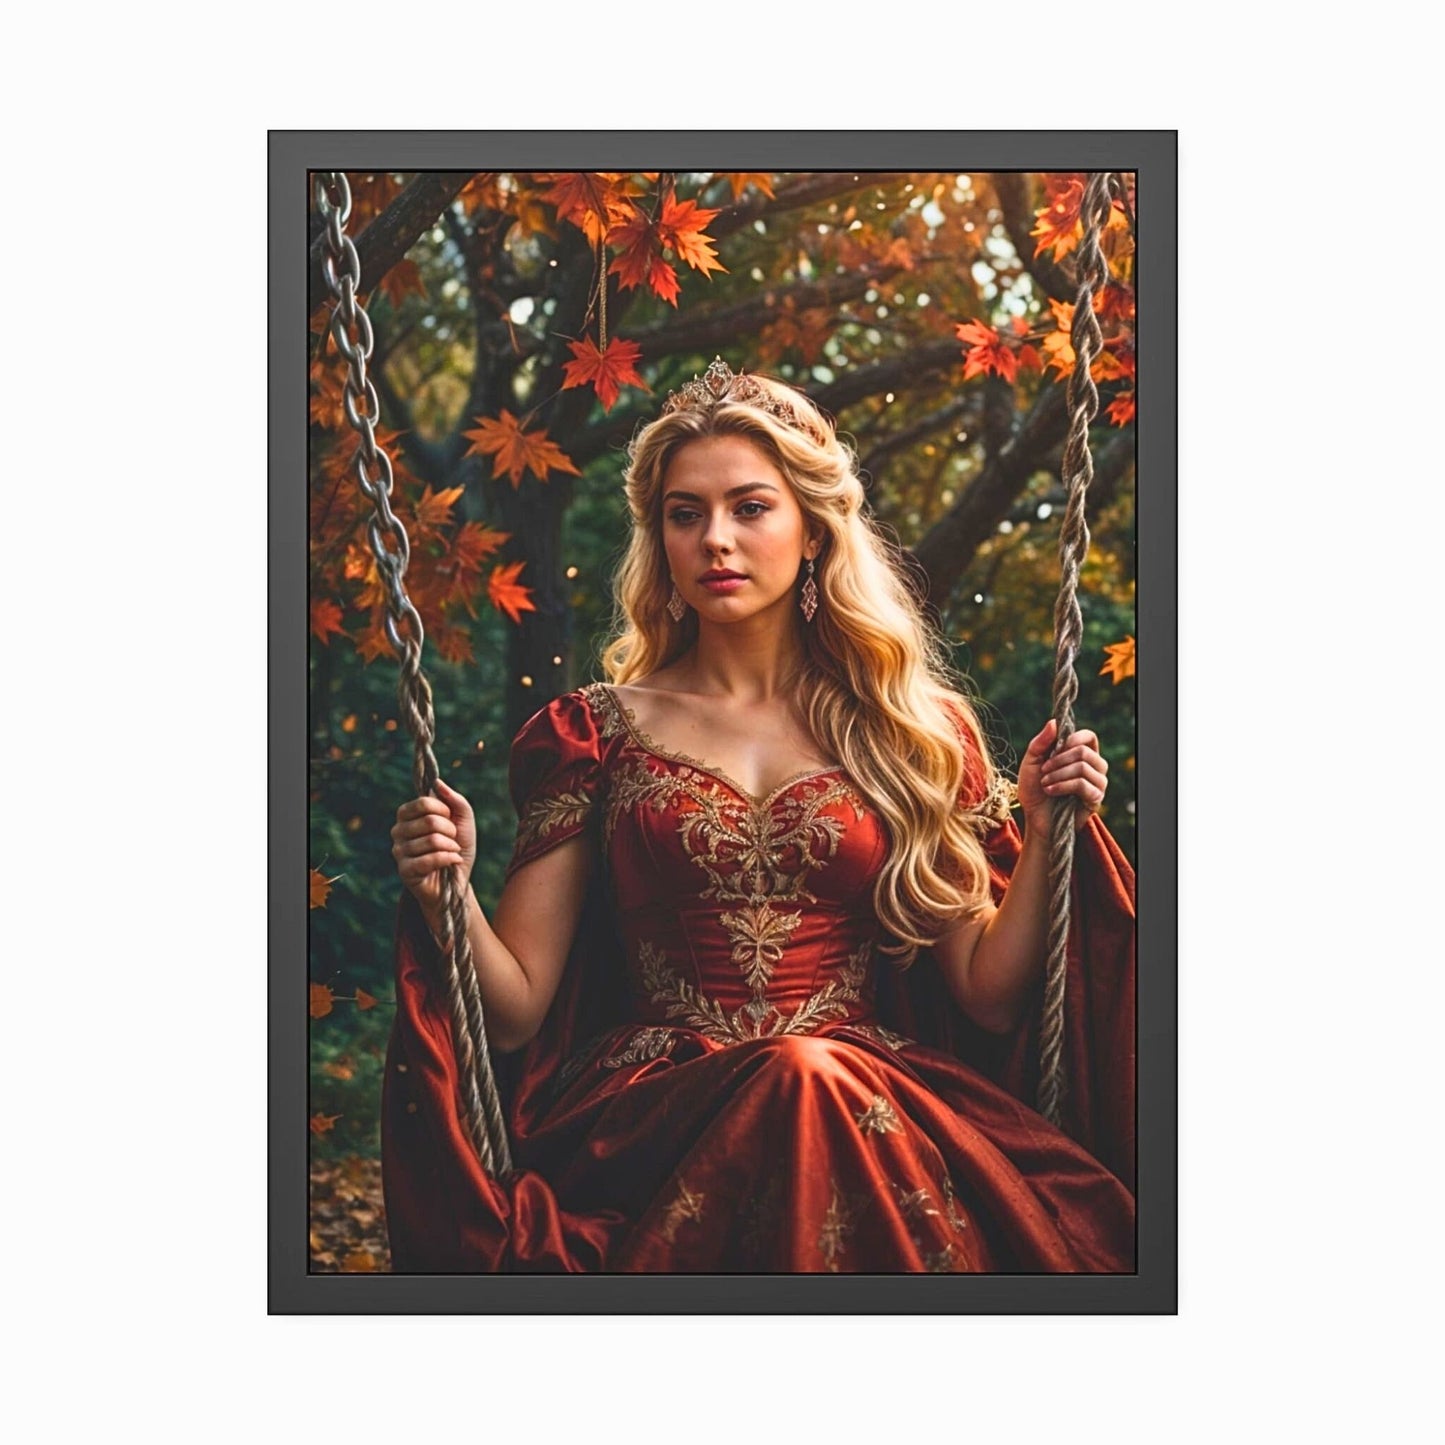 Transform your favorite photo into a stunning Renaissance portrait fit for royalty! Ideal for those seeking a distinctive birthday gift or a custom queen portrait. This personalized royal queen with sword portrait combines historical charm with a touch of elegance. Perfect for celebrating her special day or as a thoughtful gift for any occasion. Capture her essence with this unique and timeless custom woman portrait.